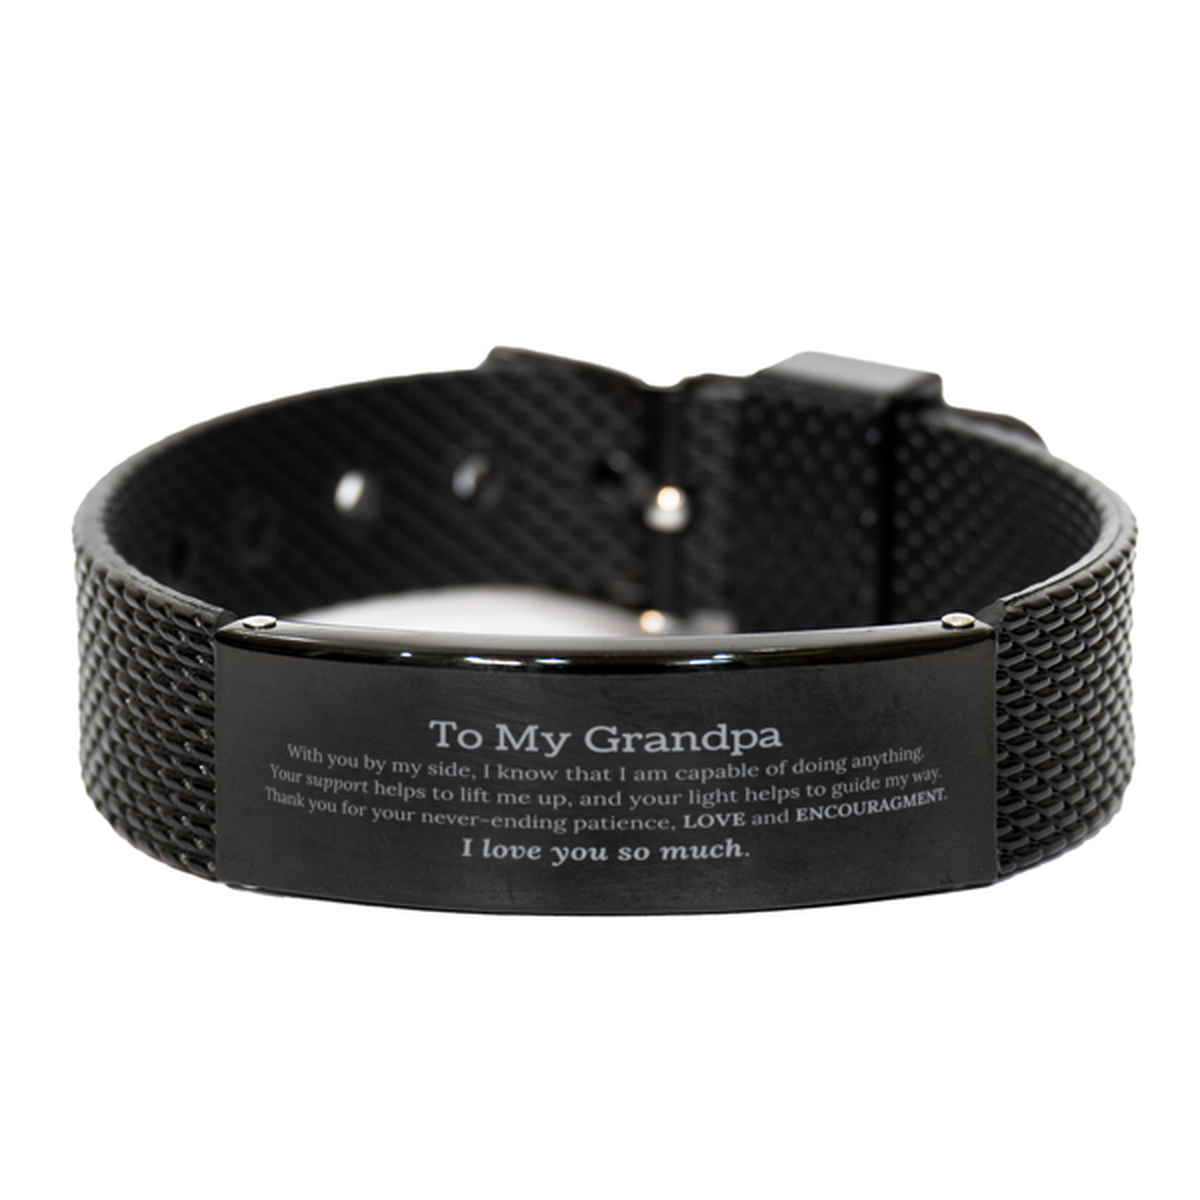 Appreciation Grandpa Black Shark Mesh Bracelet Gifts, To My Grandpa Birthday Christmas Wedding Keepsake Gifts for Grandpa With you by my side, I know that I am capable of doing anything. I love you so much